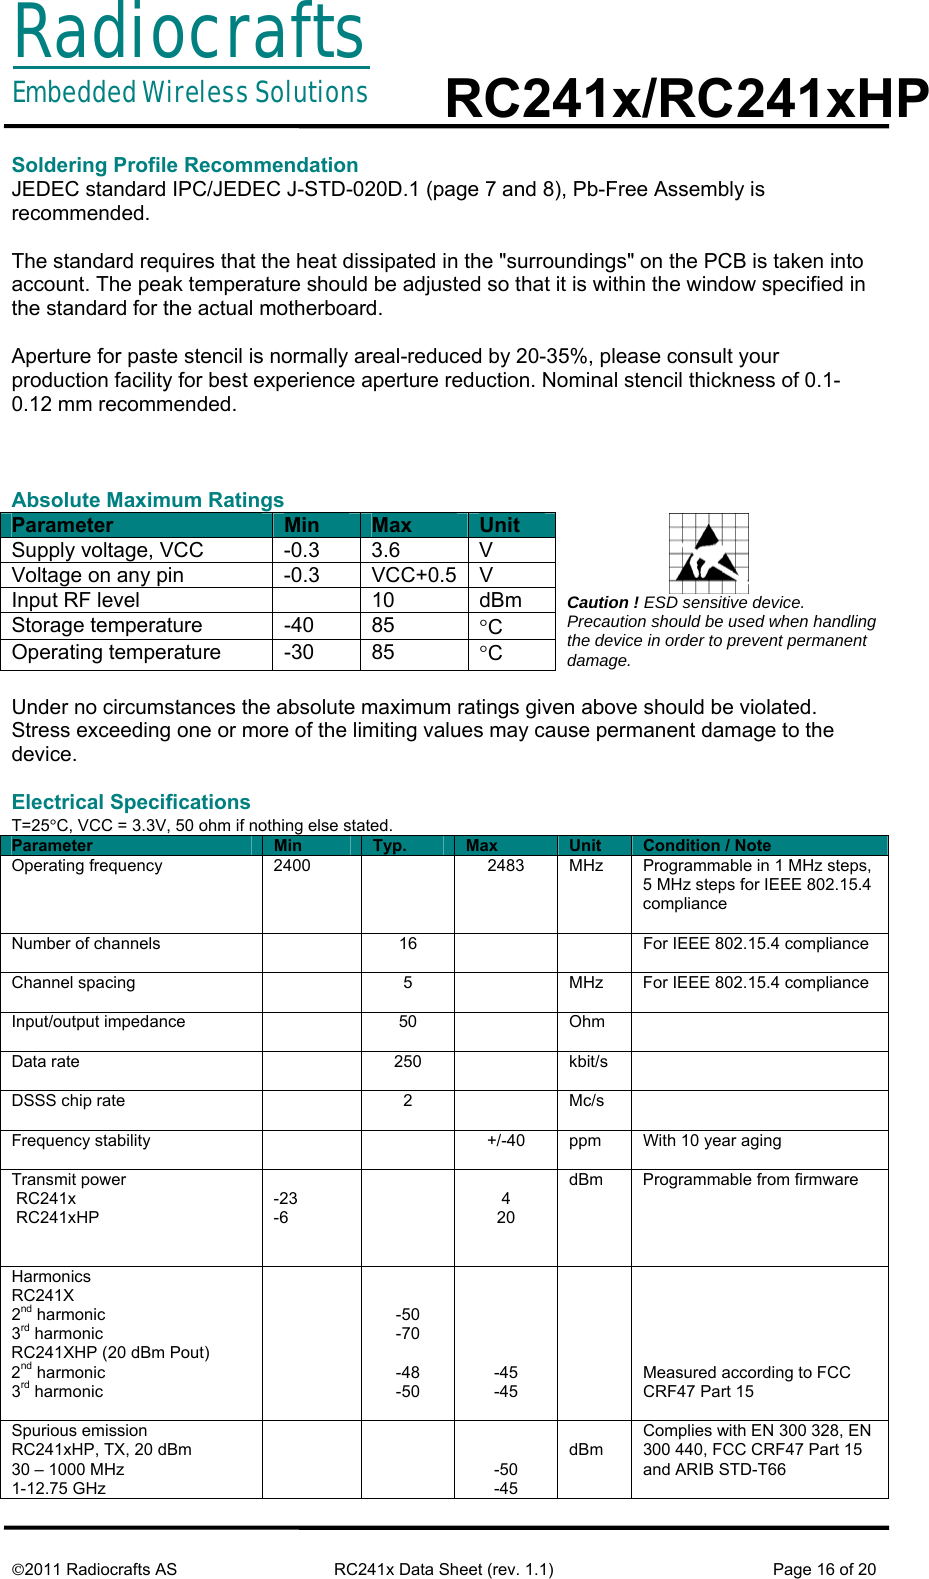 RadiocraftsEmbedded Wireless Solutions  RC241x/RC241xHP     ©2011 Radiocrafts AS  RC241x Data Sheet (rev. 1.1)  Page 16 of 20  Soldering Profile Recommendation JEDEC standard IPC/JEDEC J-STD-020D.1 (page 7 and 8), Pb-Free Assembly is recommended.  The standard requires that the heat dissipated in the &quot;surroundings&quot; on the PCB is taken into account. The peak temperature should be adjusted so that it is within the window specified in the standard for the actual motherboard.  Aperture for paste stencil is normally areal-reduced by 20-35%, please consult your production facility for best experience aperture reduction. Nominal stencil thickness of 0.1-0.12 mm recommended.     Absolute Maximum Ratings Parameter  Min  Max  Unit Supply voltage, VCC  -0.3  3.6  V Voltage on any pin  -0.3  VCC+0.5 V Input RF level    10  dBm Storage temperature  -40  85  °C Operating temperature  -30  85  °C                         Caution ! ESD sensitive device. Precaution should be used when handling the device in order to prevent permanent damage.  Under no circumstances the absolute maximum ratings given above should be violated. Stress exceeding one or more of the limiting values may cause permanent damage to the device.  Electrical Specifications T=25°C, VCC = 3.3V, 50 ohm if nothing else stated. Parameter  Min  Typ.  Max  Unit  Condition / Note Operating frequency  2400    2483  MHz  Programmable in 1 MHz steps, 5 MHz steps for IEEE 802.15.4 compliance  Number of channels    16      For IEEE 802.15.4 compliance Channel spacing    5    MHz  For IEEE 802.15.4 compliance Input/output impedance   50  Ohm  Data rate   250  kbit/s  DSSS chip rate   2  Mc/s  Frequency stability      +/-40  ppm  With 10 year aging Transmit power   RC241x  RC241xHP    -23 -6   4 20 dBm  Programmable from firmware Harmonics RC241X  2nd harmonic 3rd harmonic RC241XHP (20 dBm Pout) 2nd harmonic  3rd harmonic     -50 -70  -48 -50      -45 -45       Measured according to FCC CRF47 Part 15 Spurious emission RC241xHP, TX, 20 dBm 30 – 1000 MHz  1-12.75 GHz      -50 -45  dBm Complies with EN 300 328, EN 300 440, FCC CRF47 Part 15 and ARIB STD-T66 